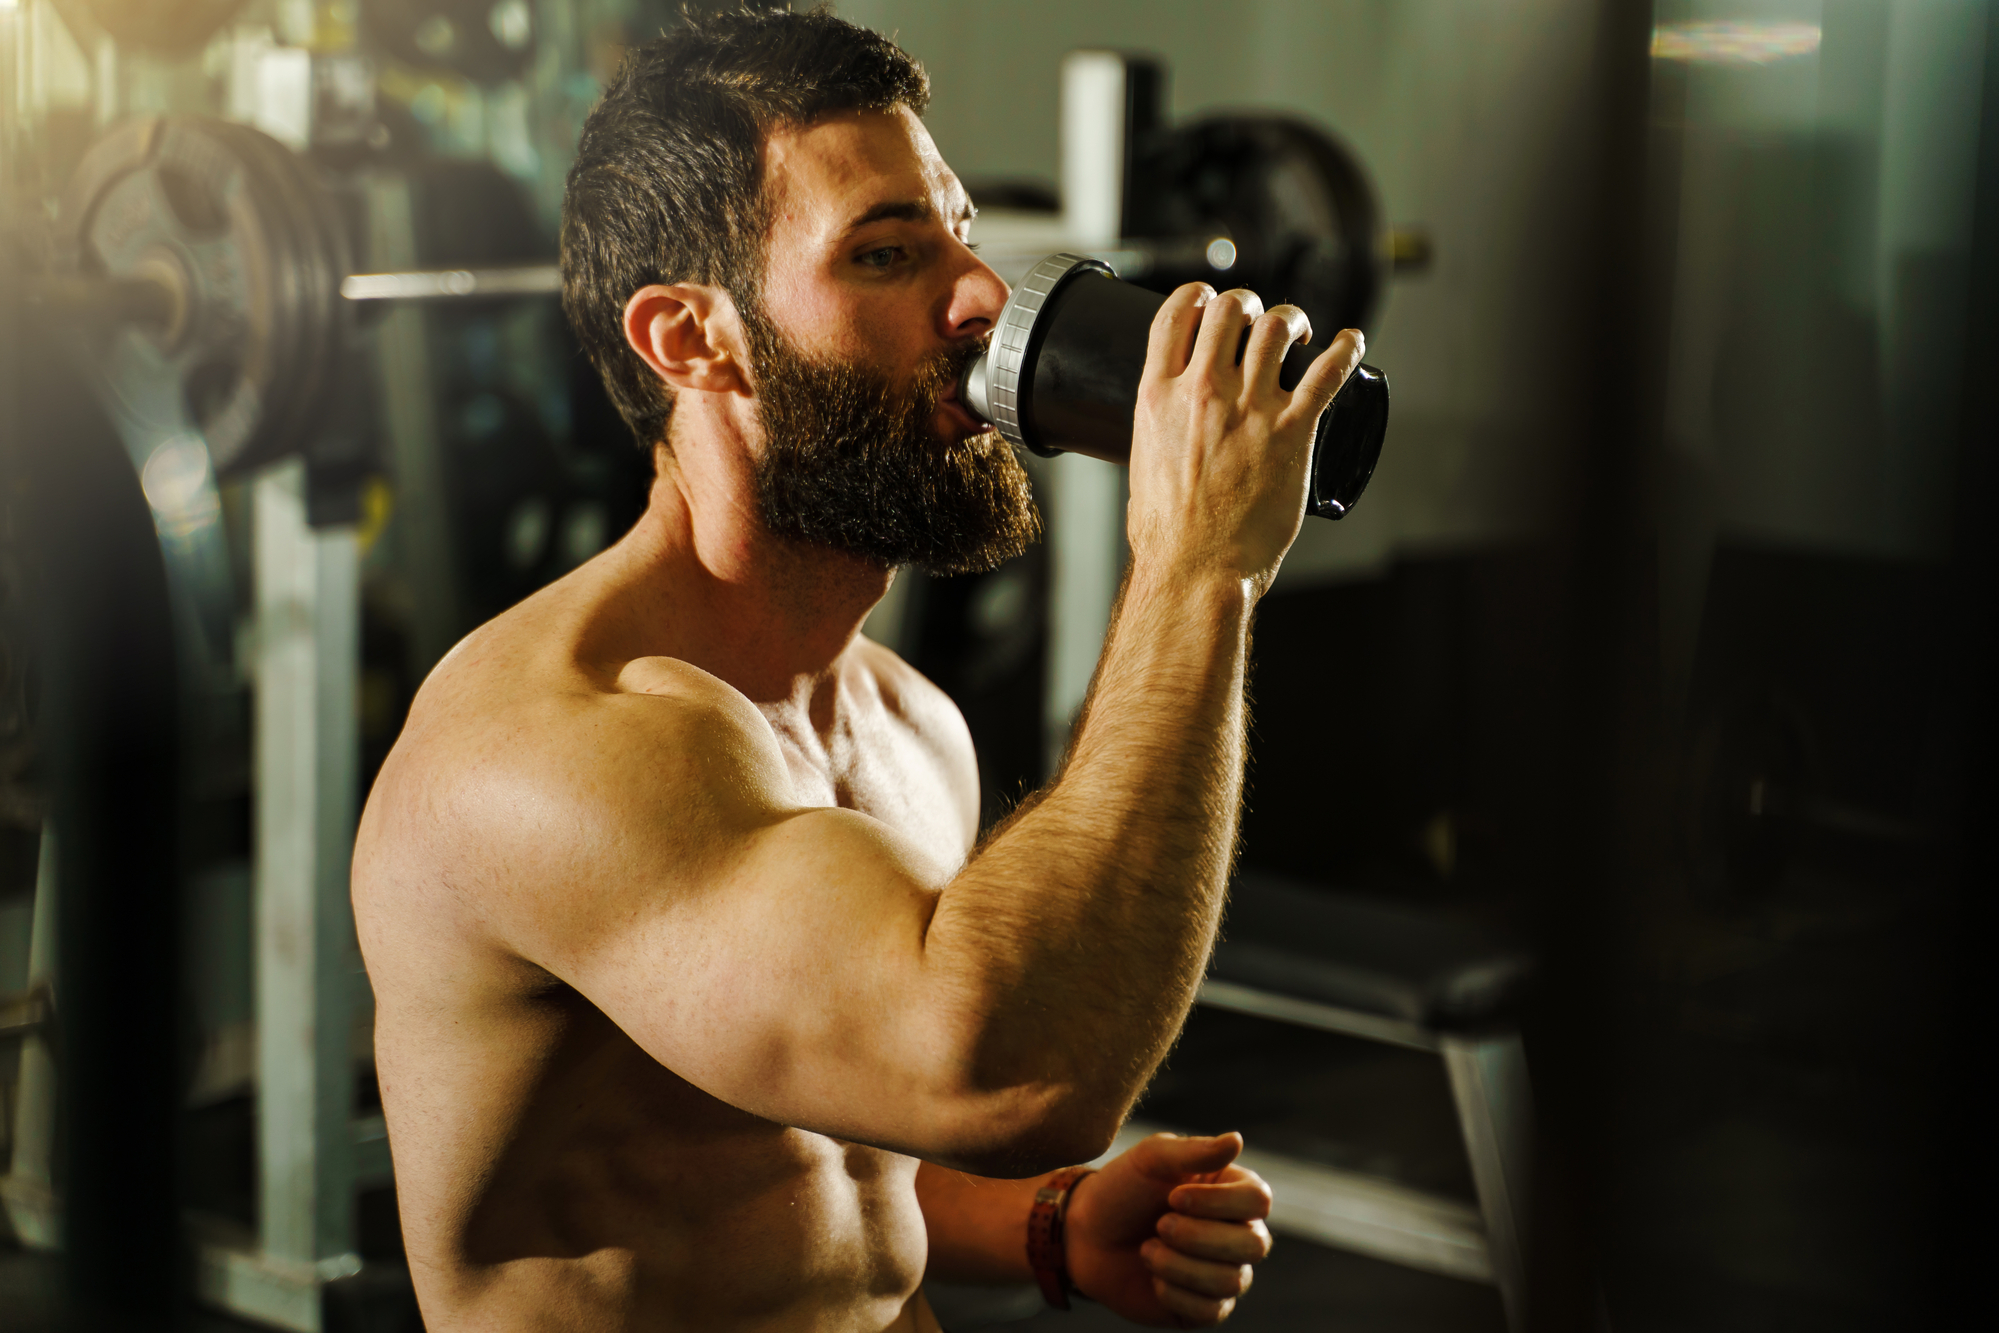 Fit man sitting by exercise equipment drinking from his black waterbottle